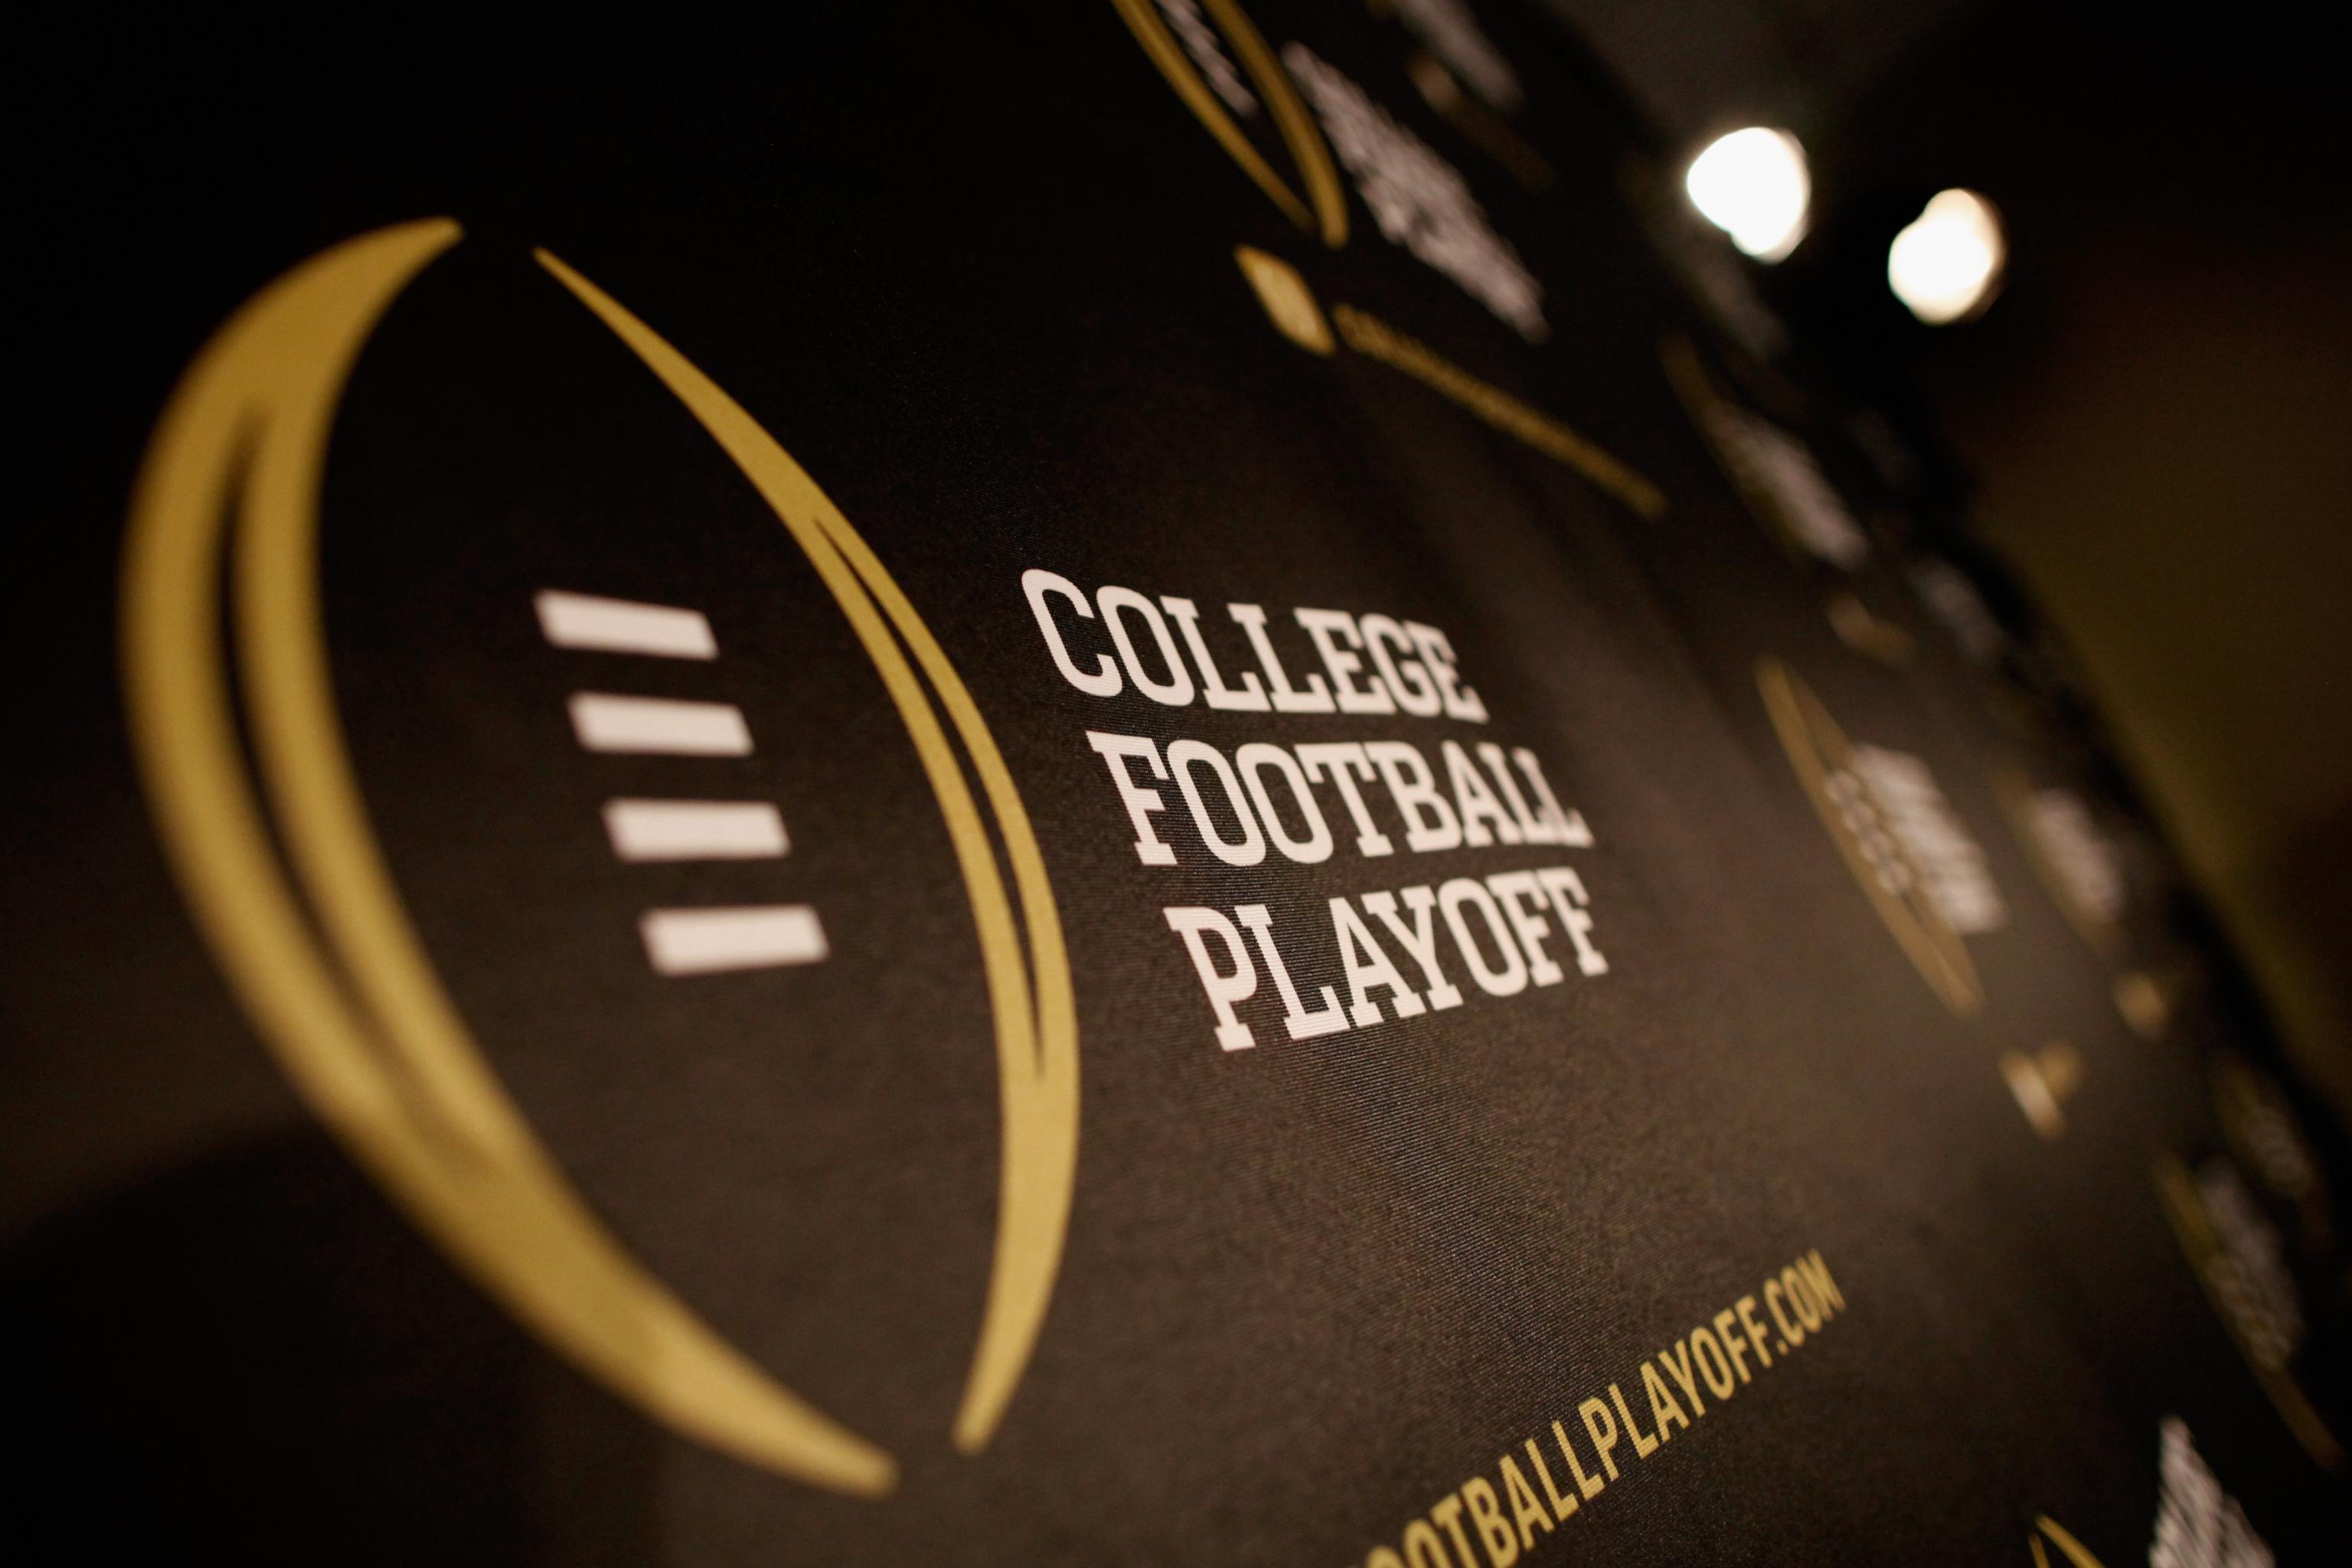 College Football Playoff Selection Reaction Show premiering on  at 12pm  CST featuring @_SDS8 @SWEETFEET @dubbherring45…